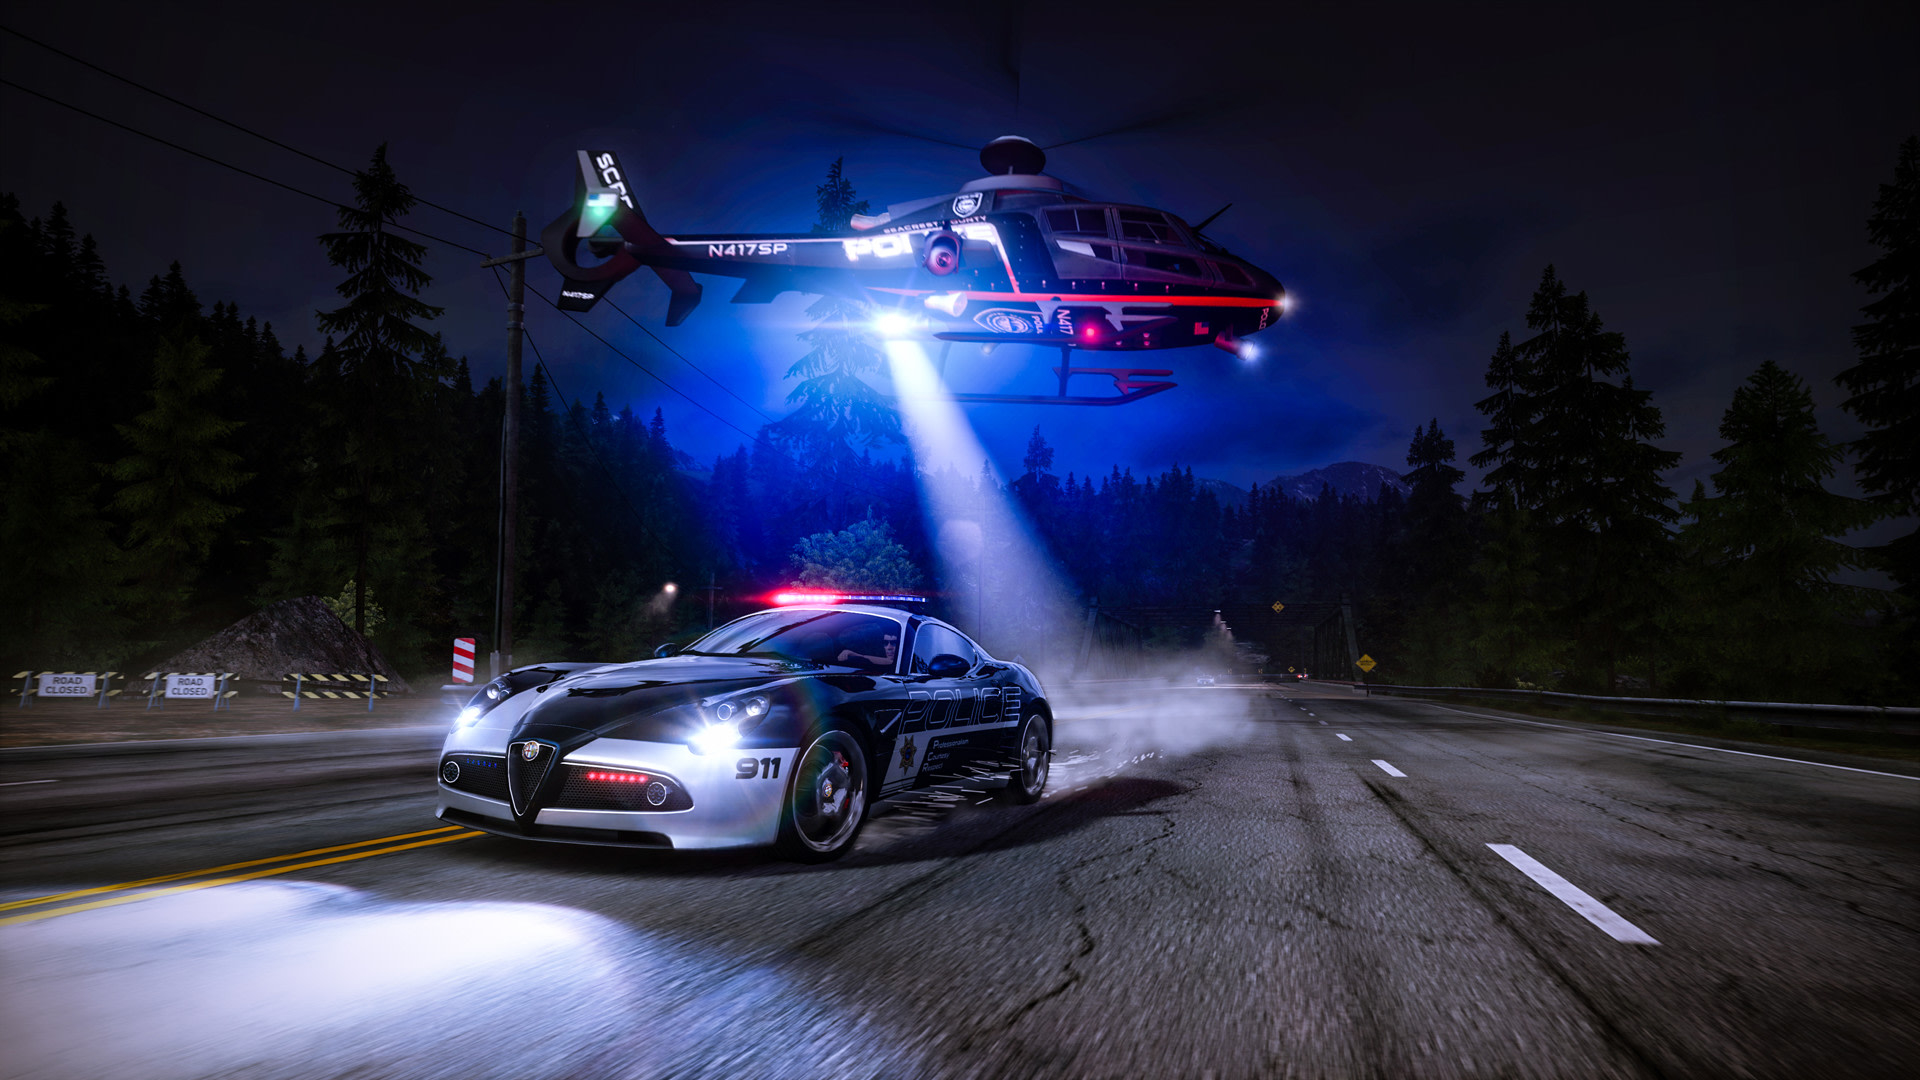 need for speed 2015.torrent